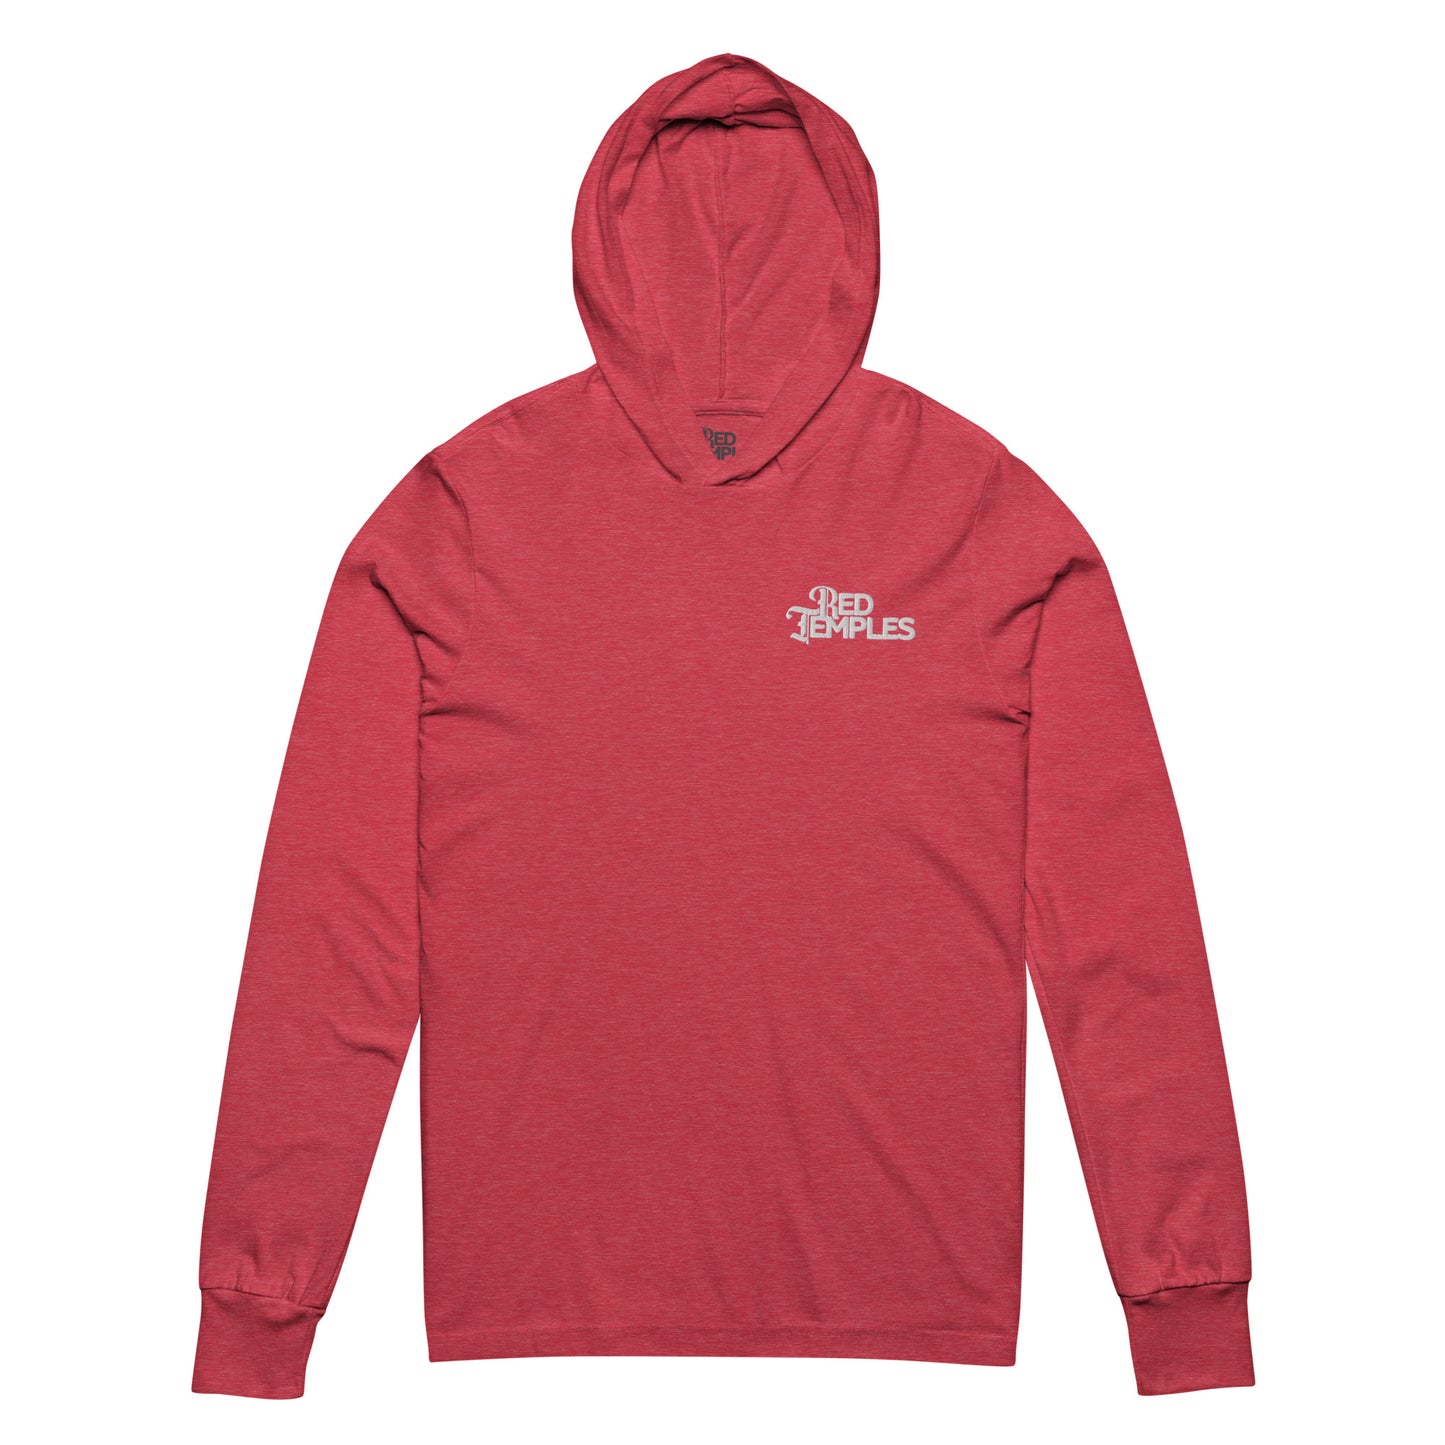 Red Temples Hooded Long-Sleeve Tee